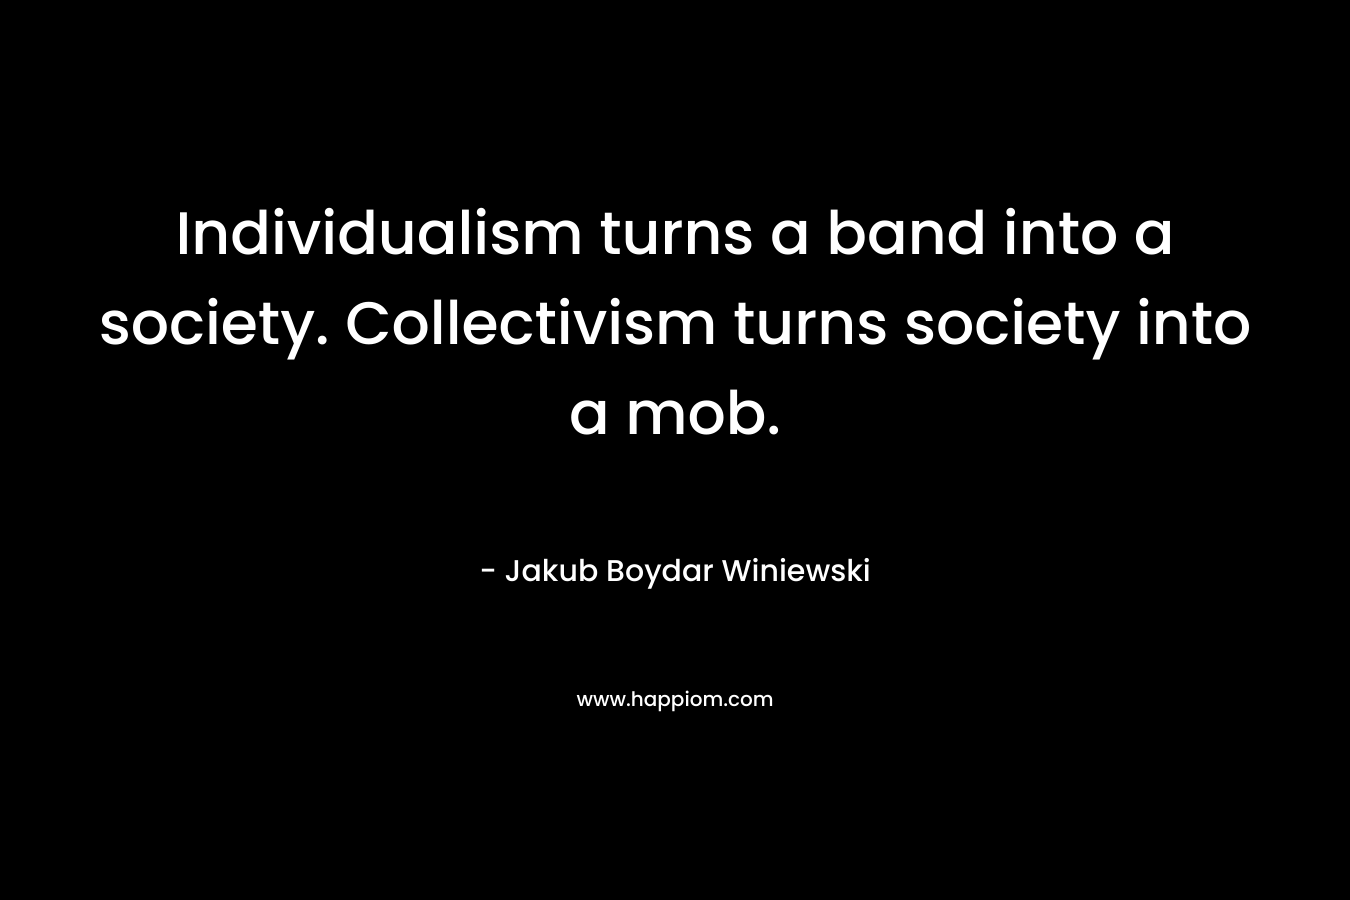 Individualism turns a band into a society. Collectivism turns society into a mob.